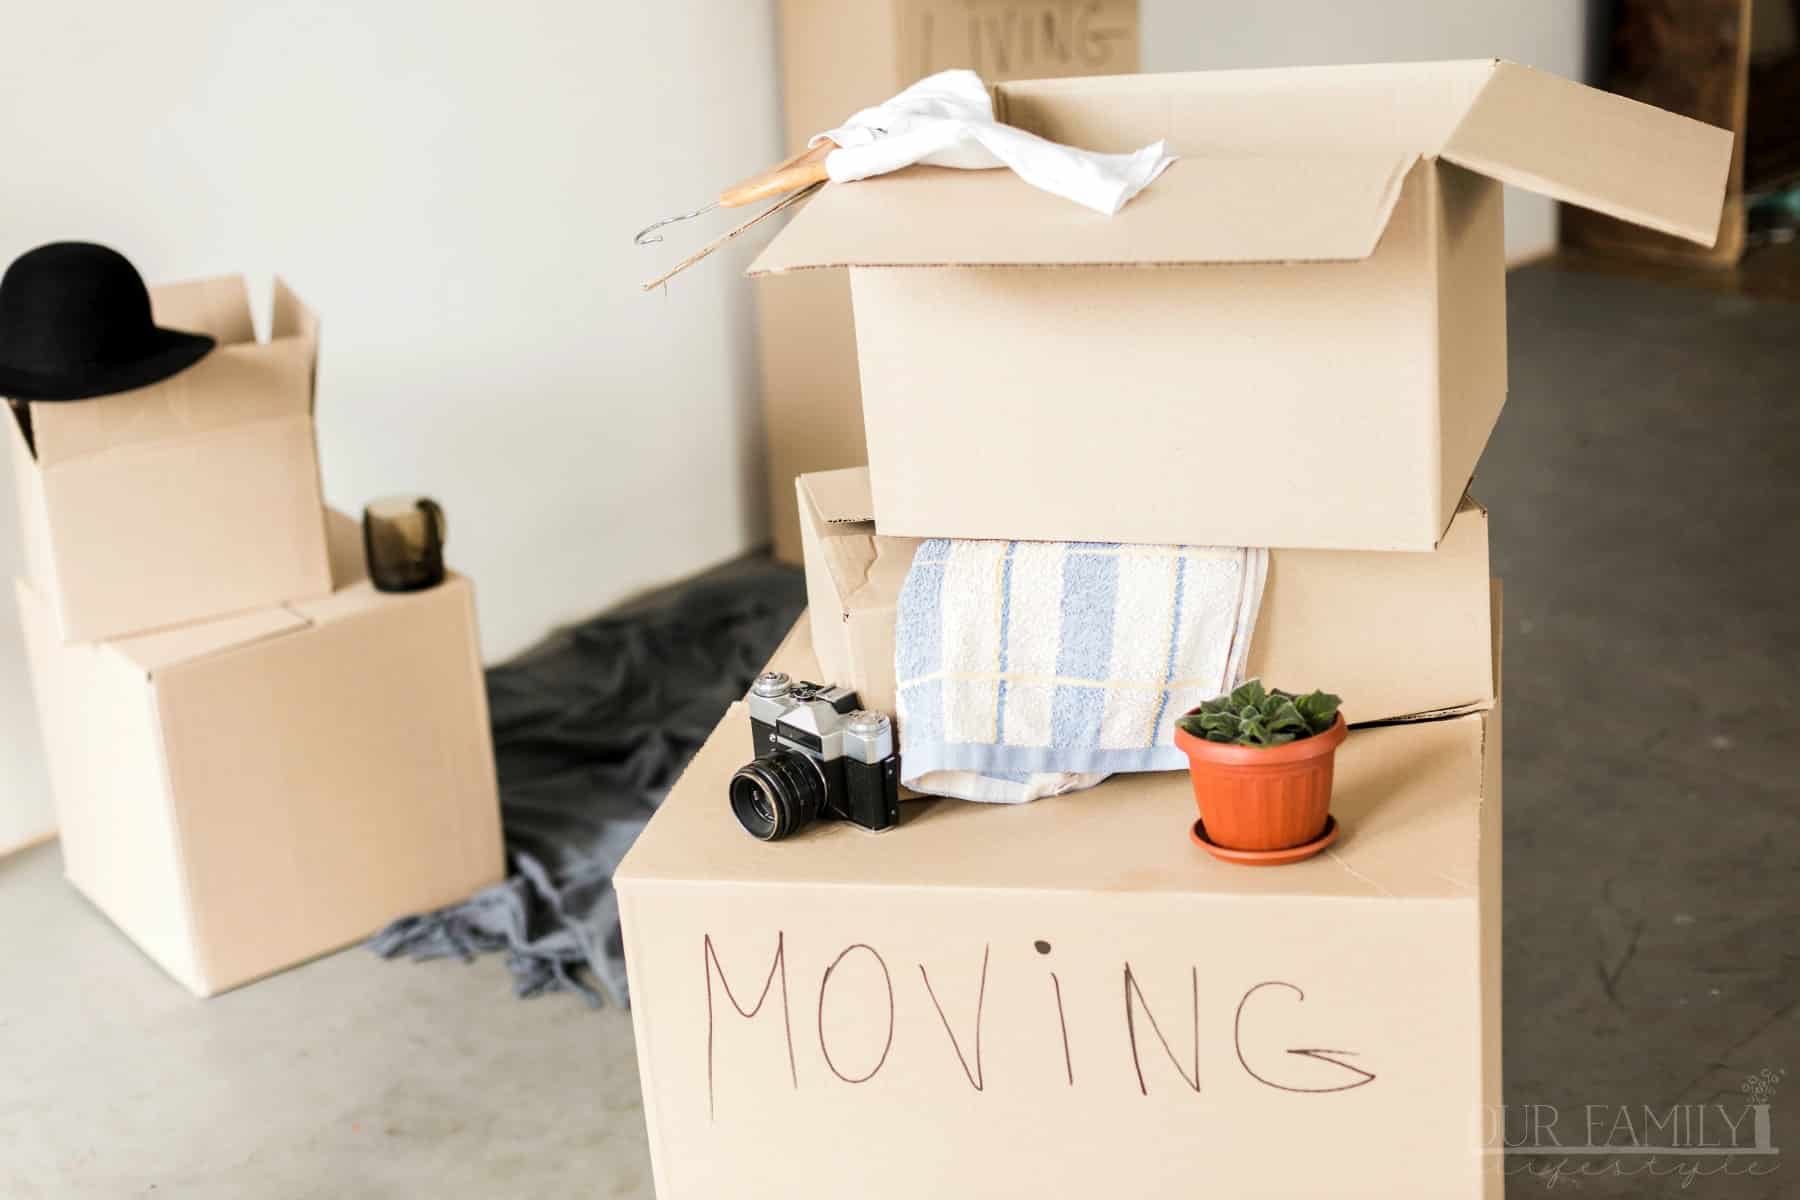 15 Things You Should Have Before Moving Into Your New Home